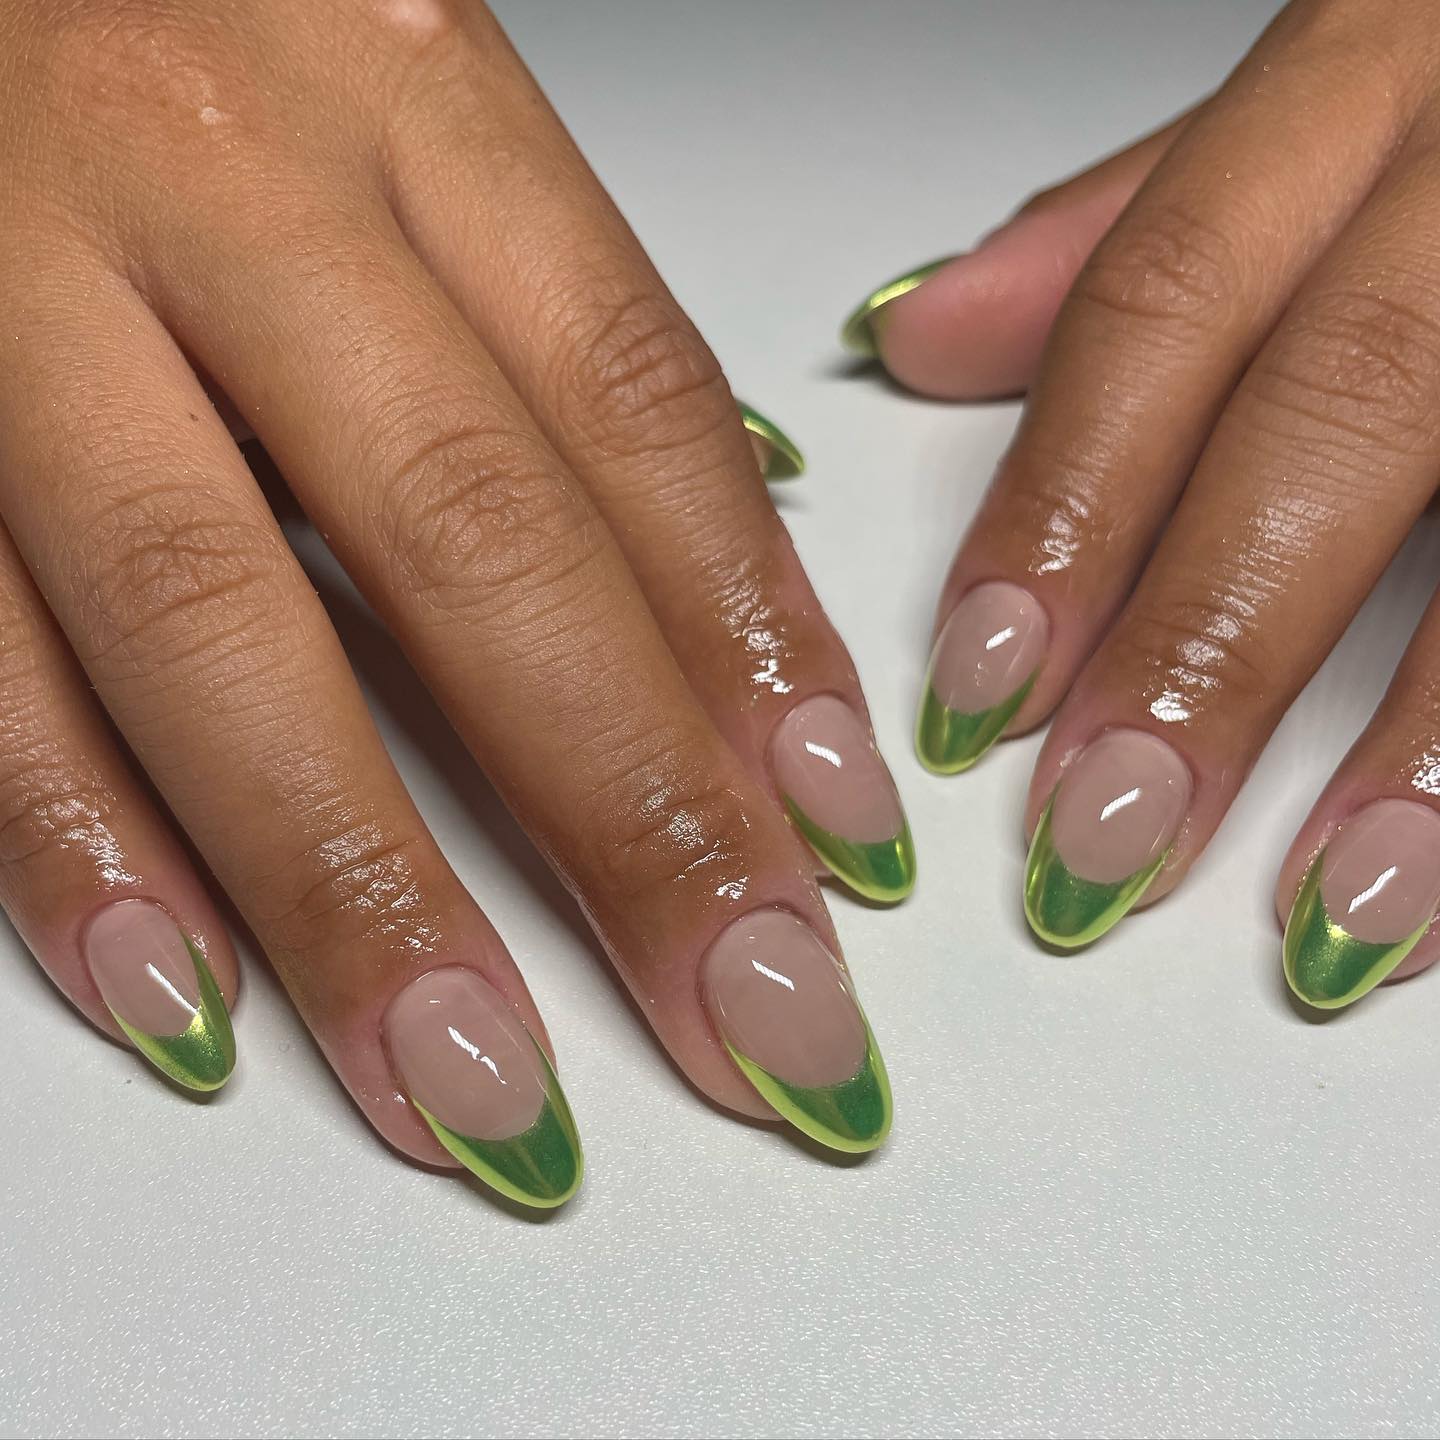 If you can't give up on applying a French manicure and you like green color, the example above is the best for you.